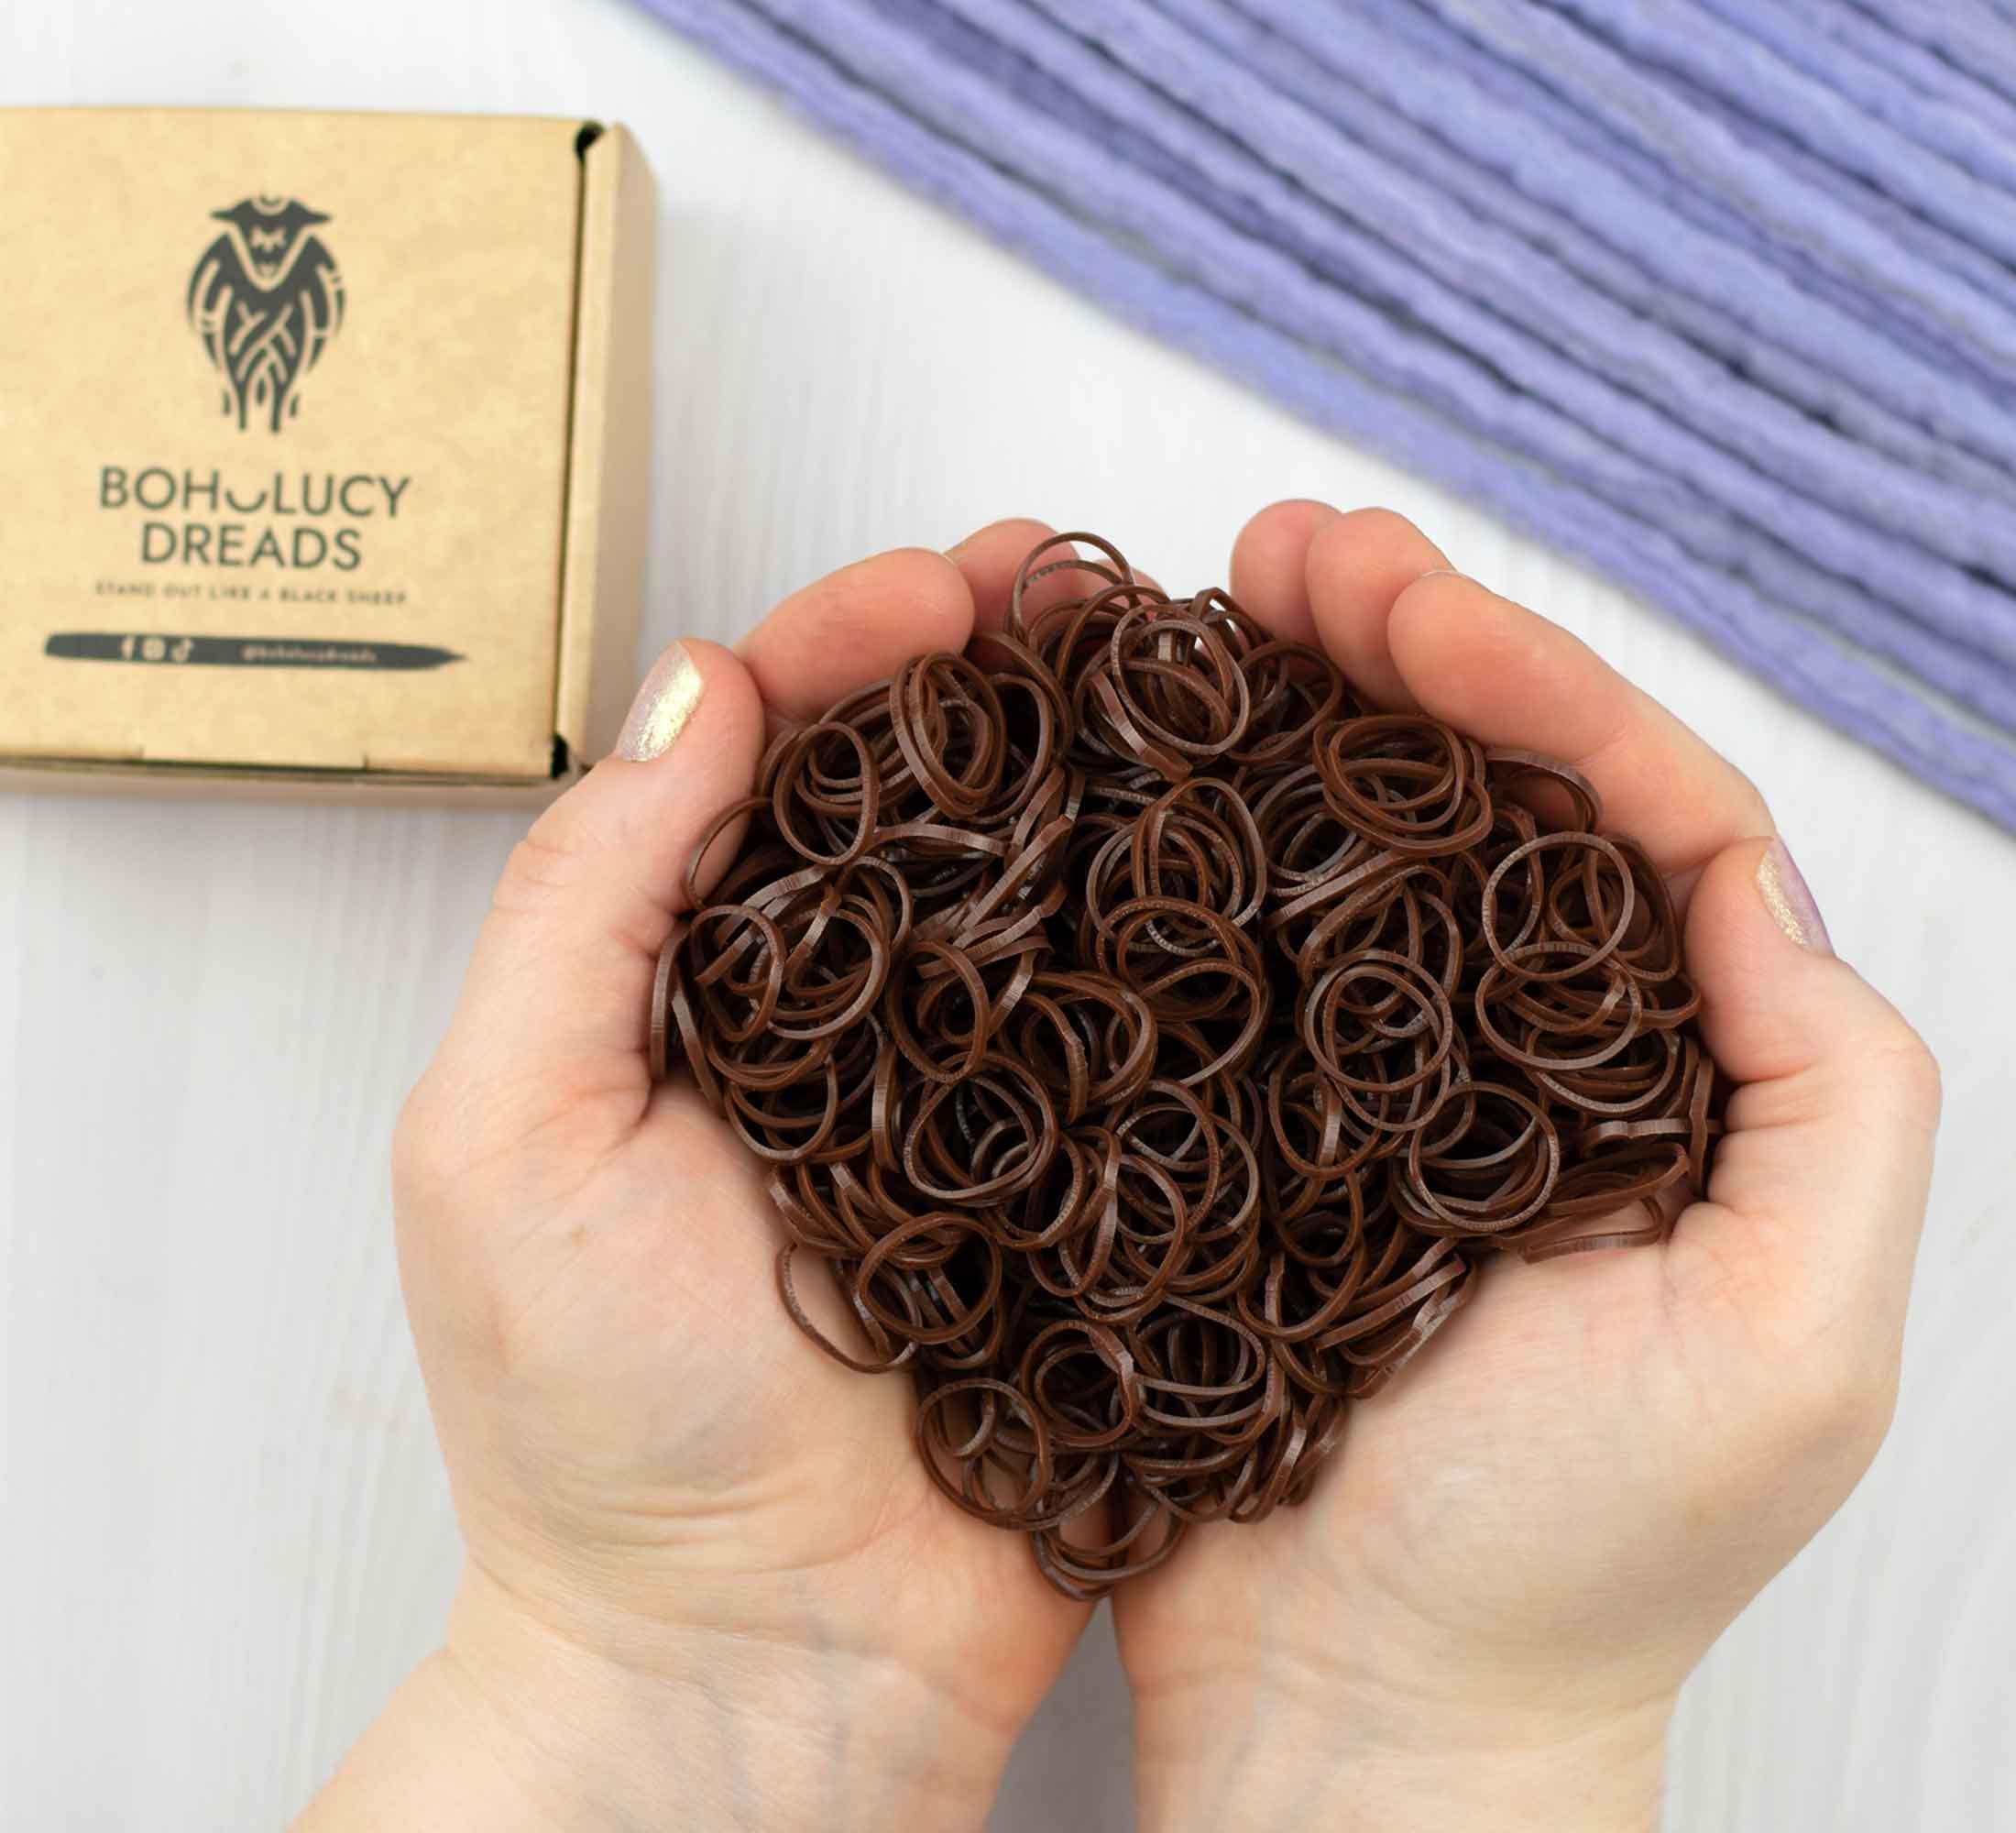 Chocolate brown rubber band 500pcs